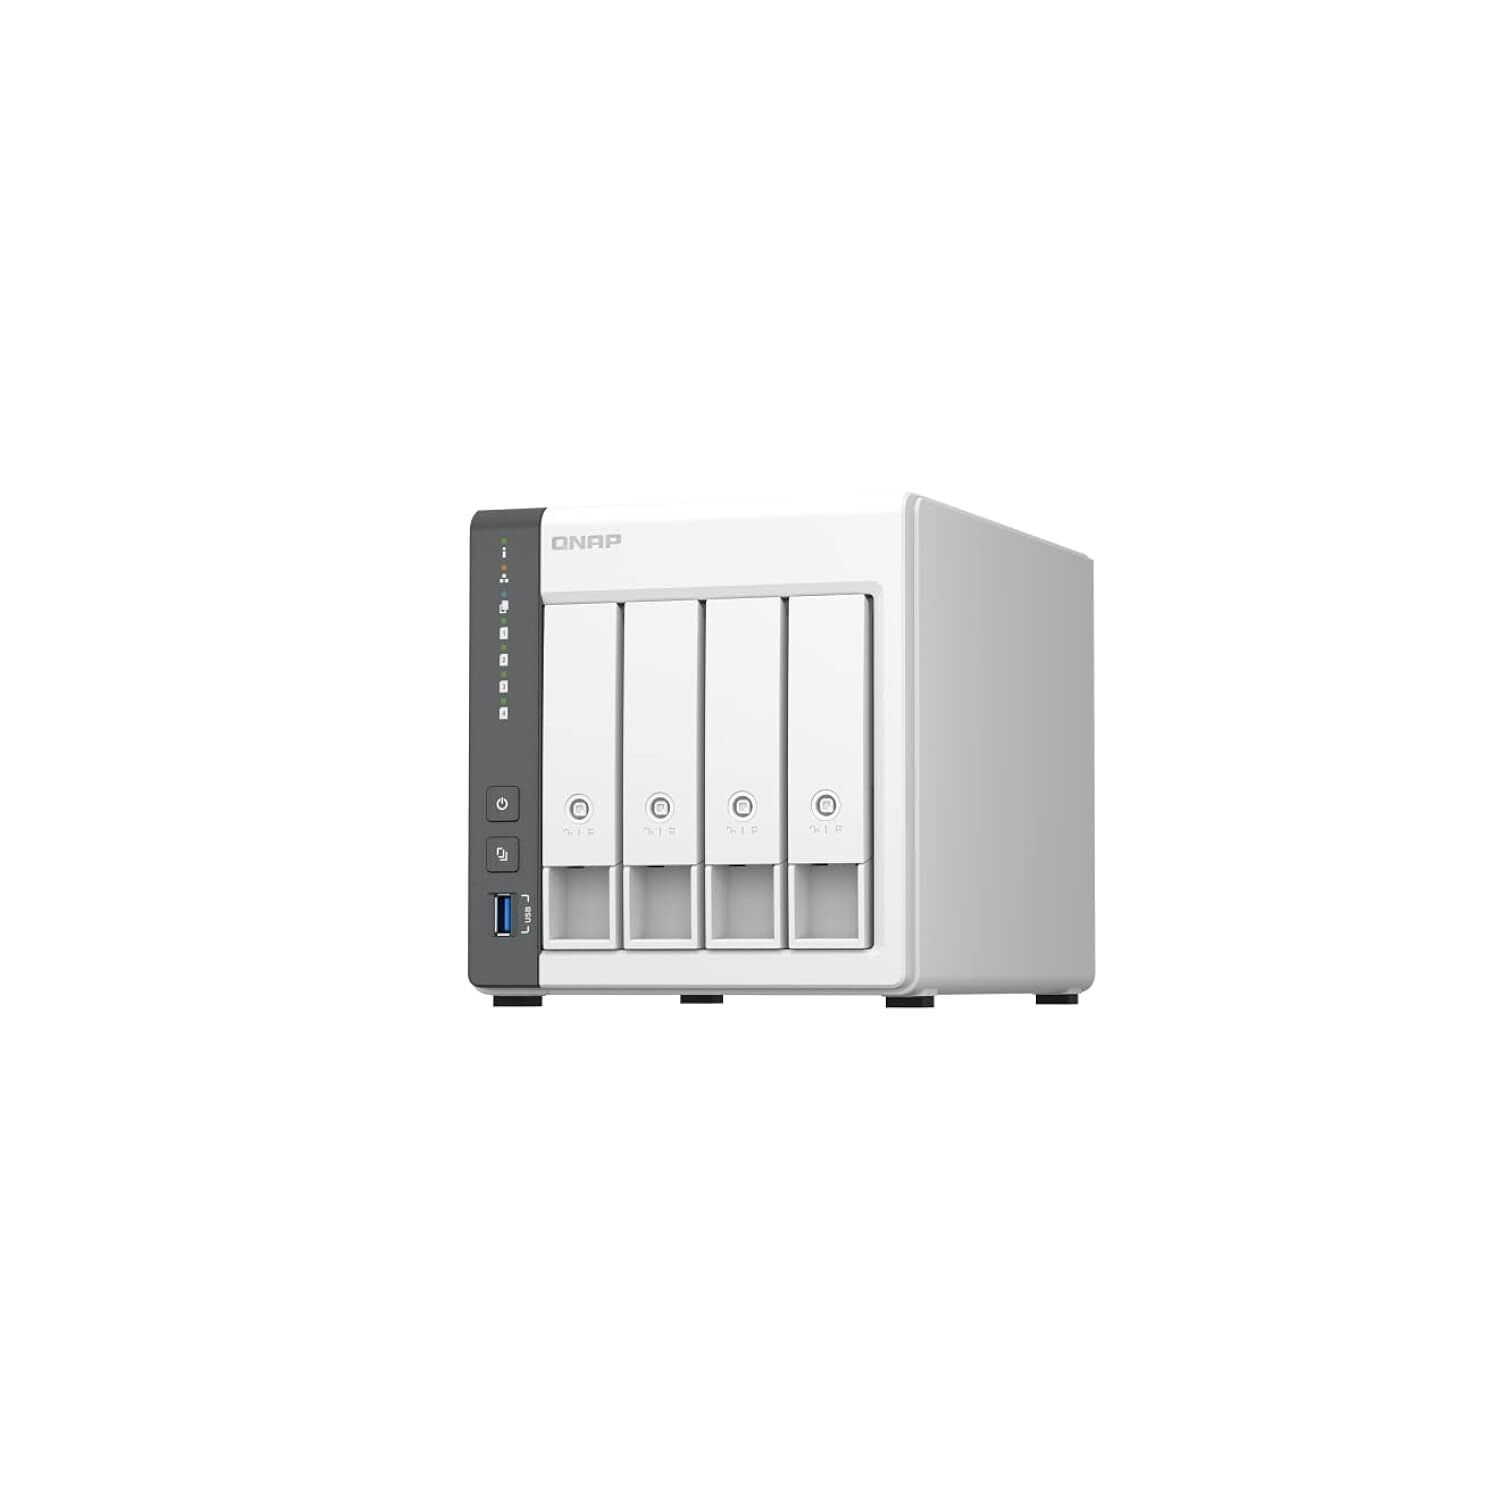 QNAP TS-433-4G-US 4 Bay NAS with Quad-core Processor, 4 GB DDR4 RAM and 2.5GbE